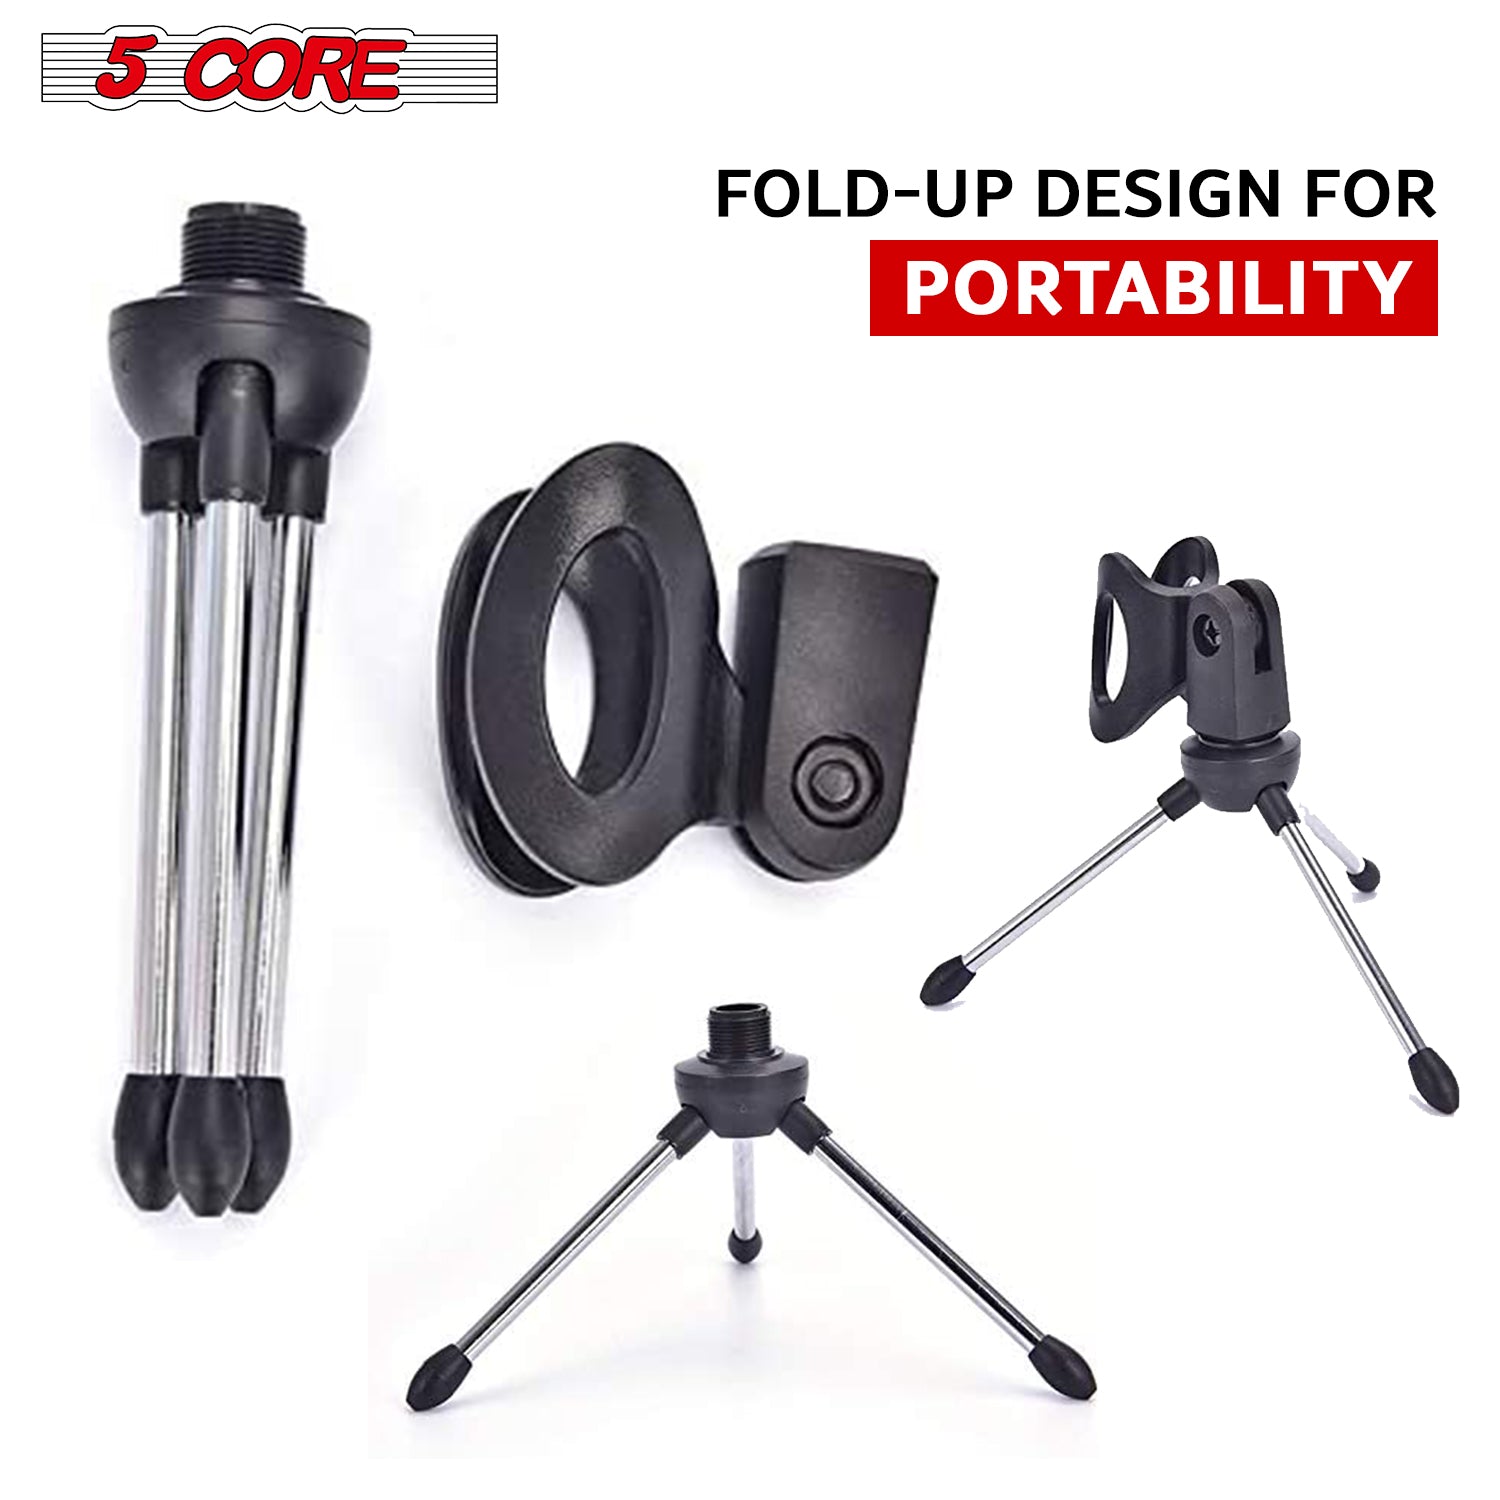 Portable desktop microphone stand: Ideal for on-the-go recording sessions.